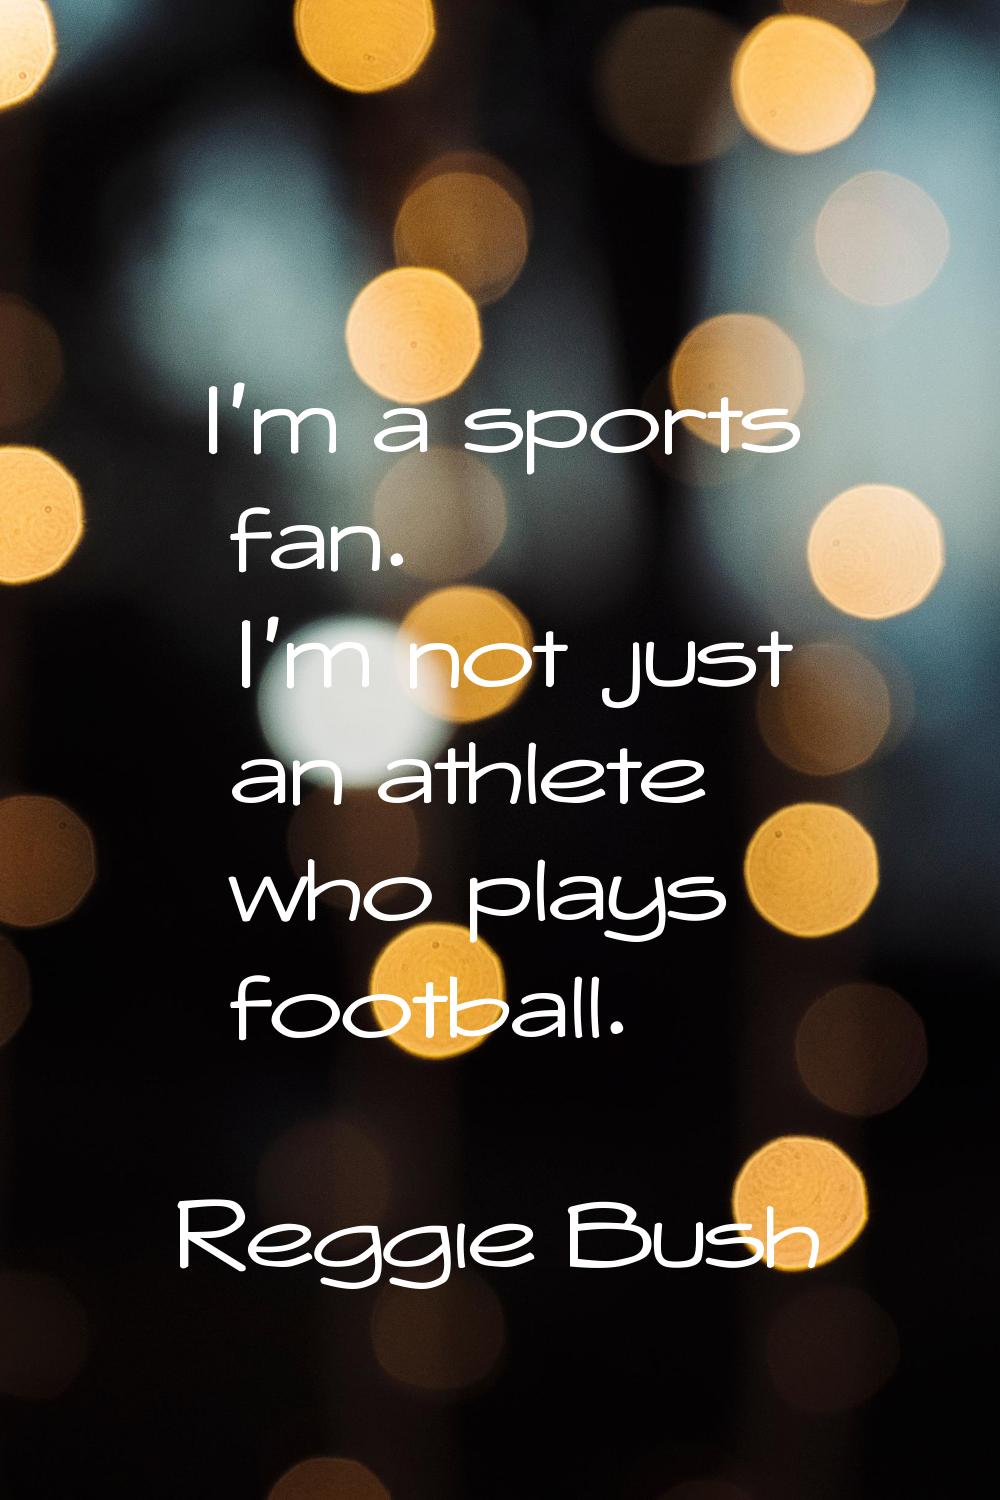 I'm a sports fan. I'm not just an athlete who plays football.